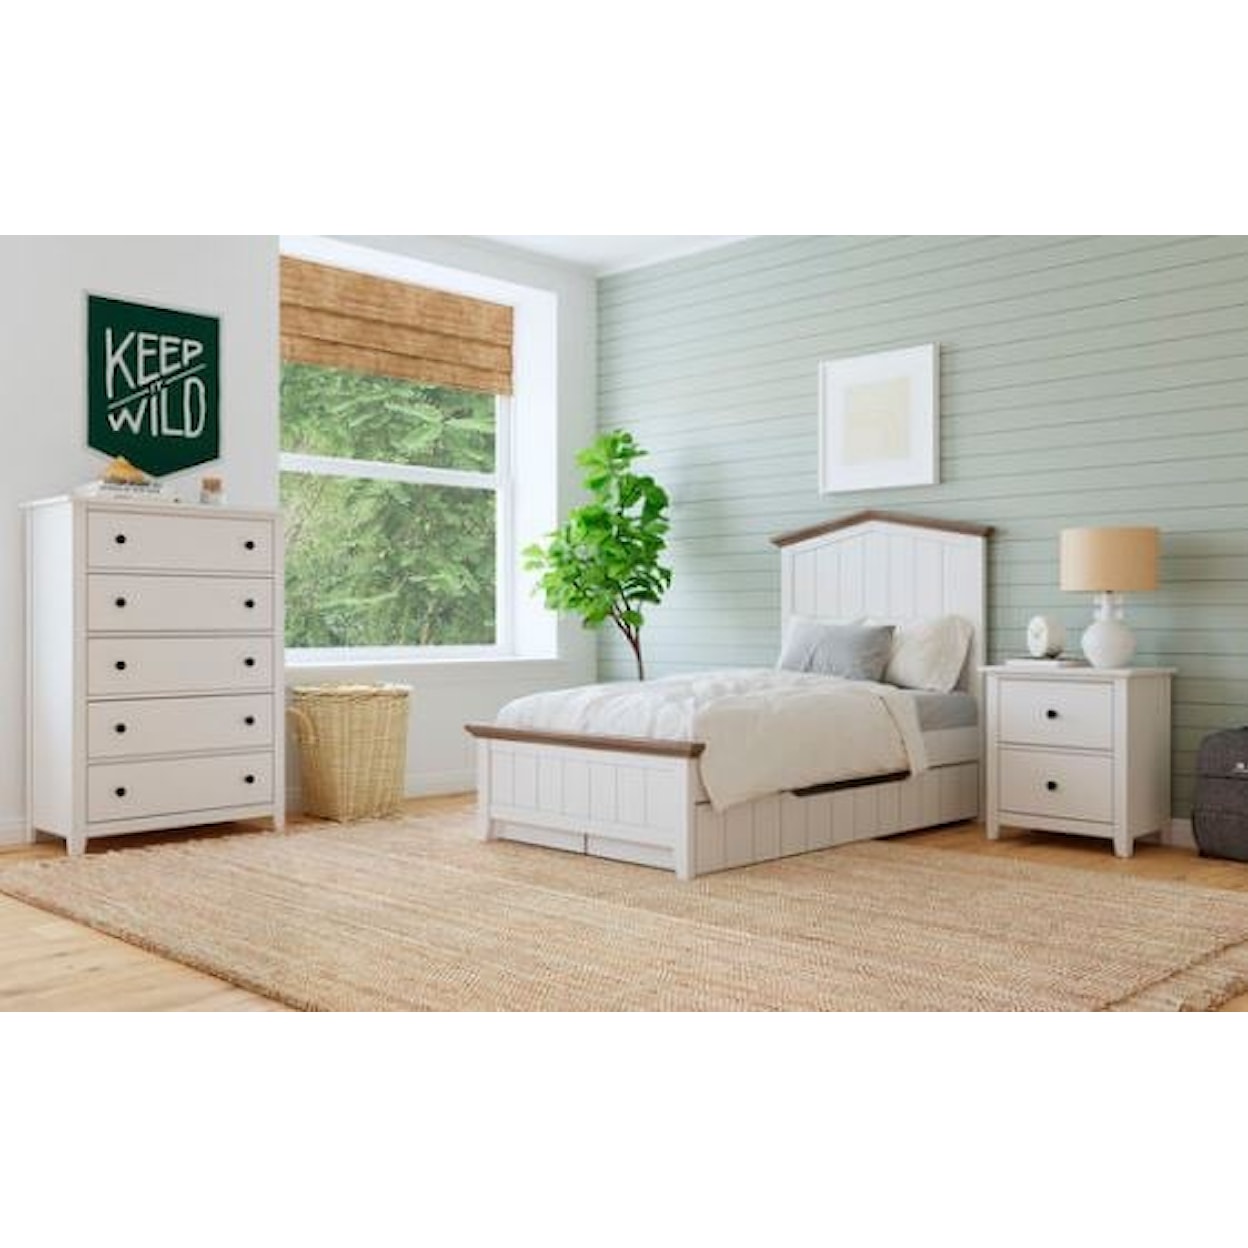 Westwood Design Lodge Series Complete Twin Bed - KIT